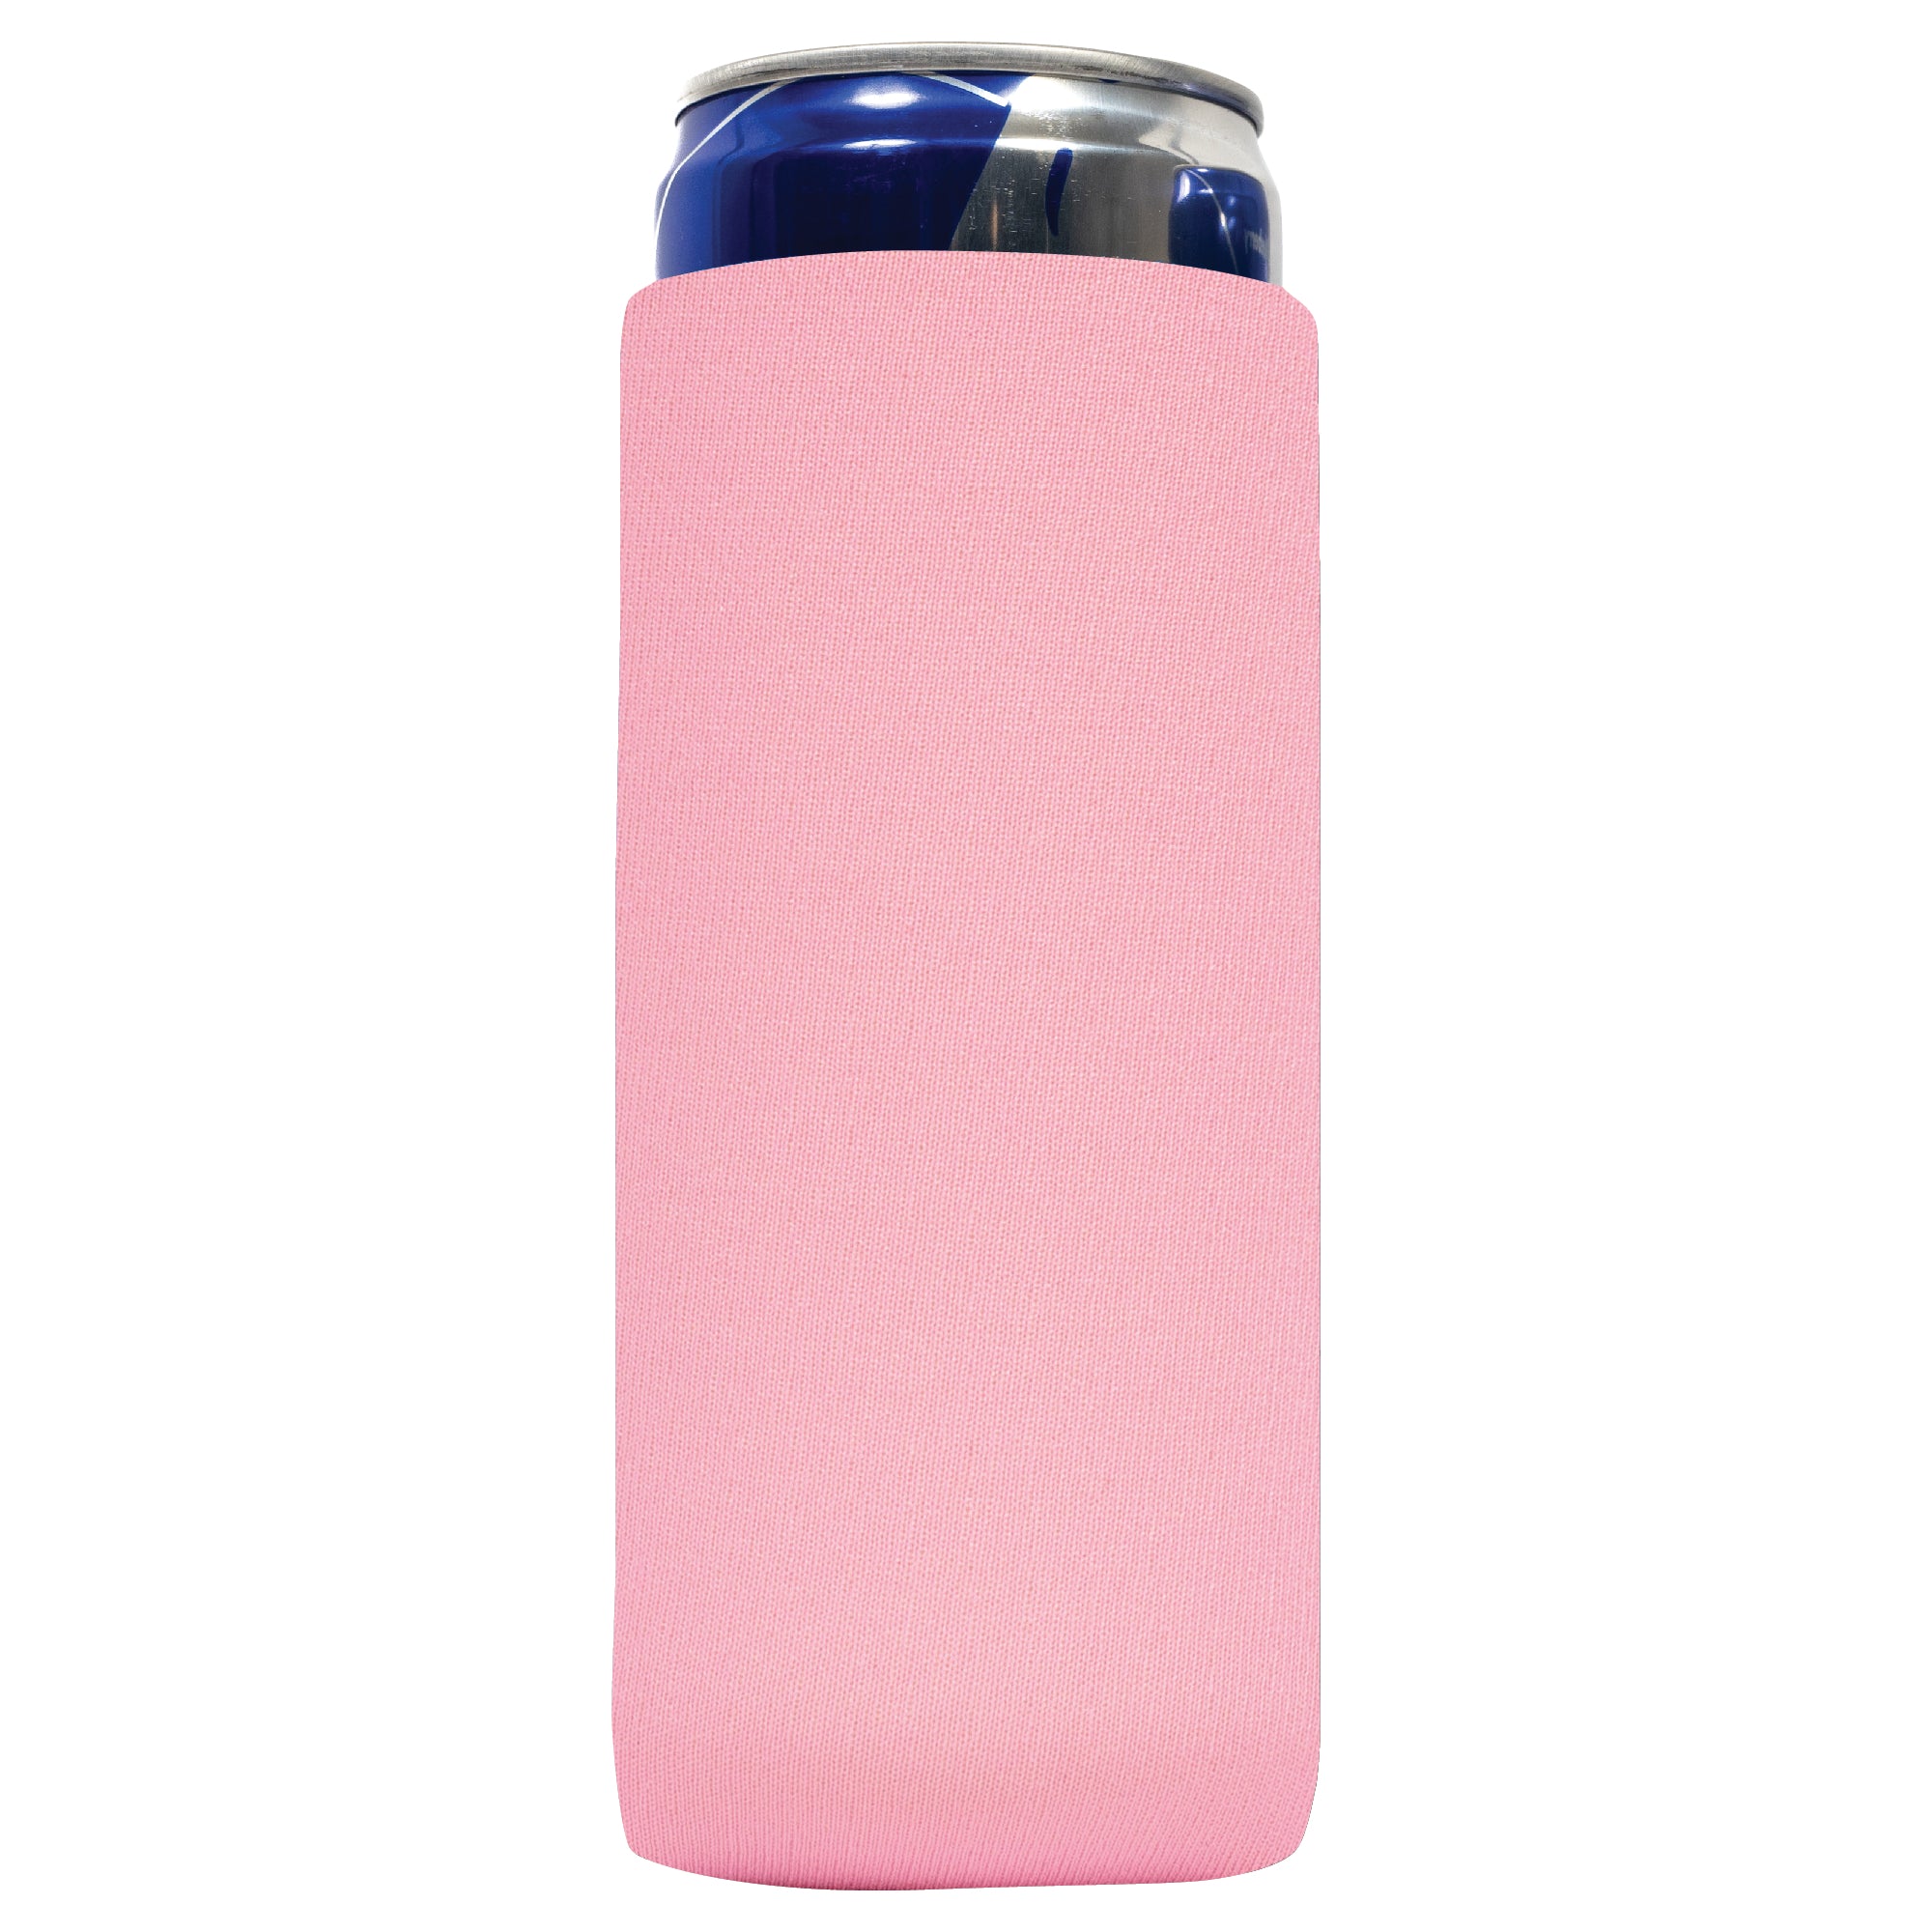 BrüMate - The world's first insulated 12oz slim koozie is